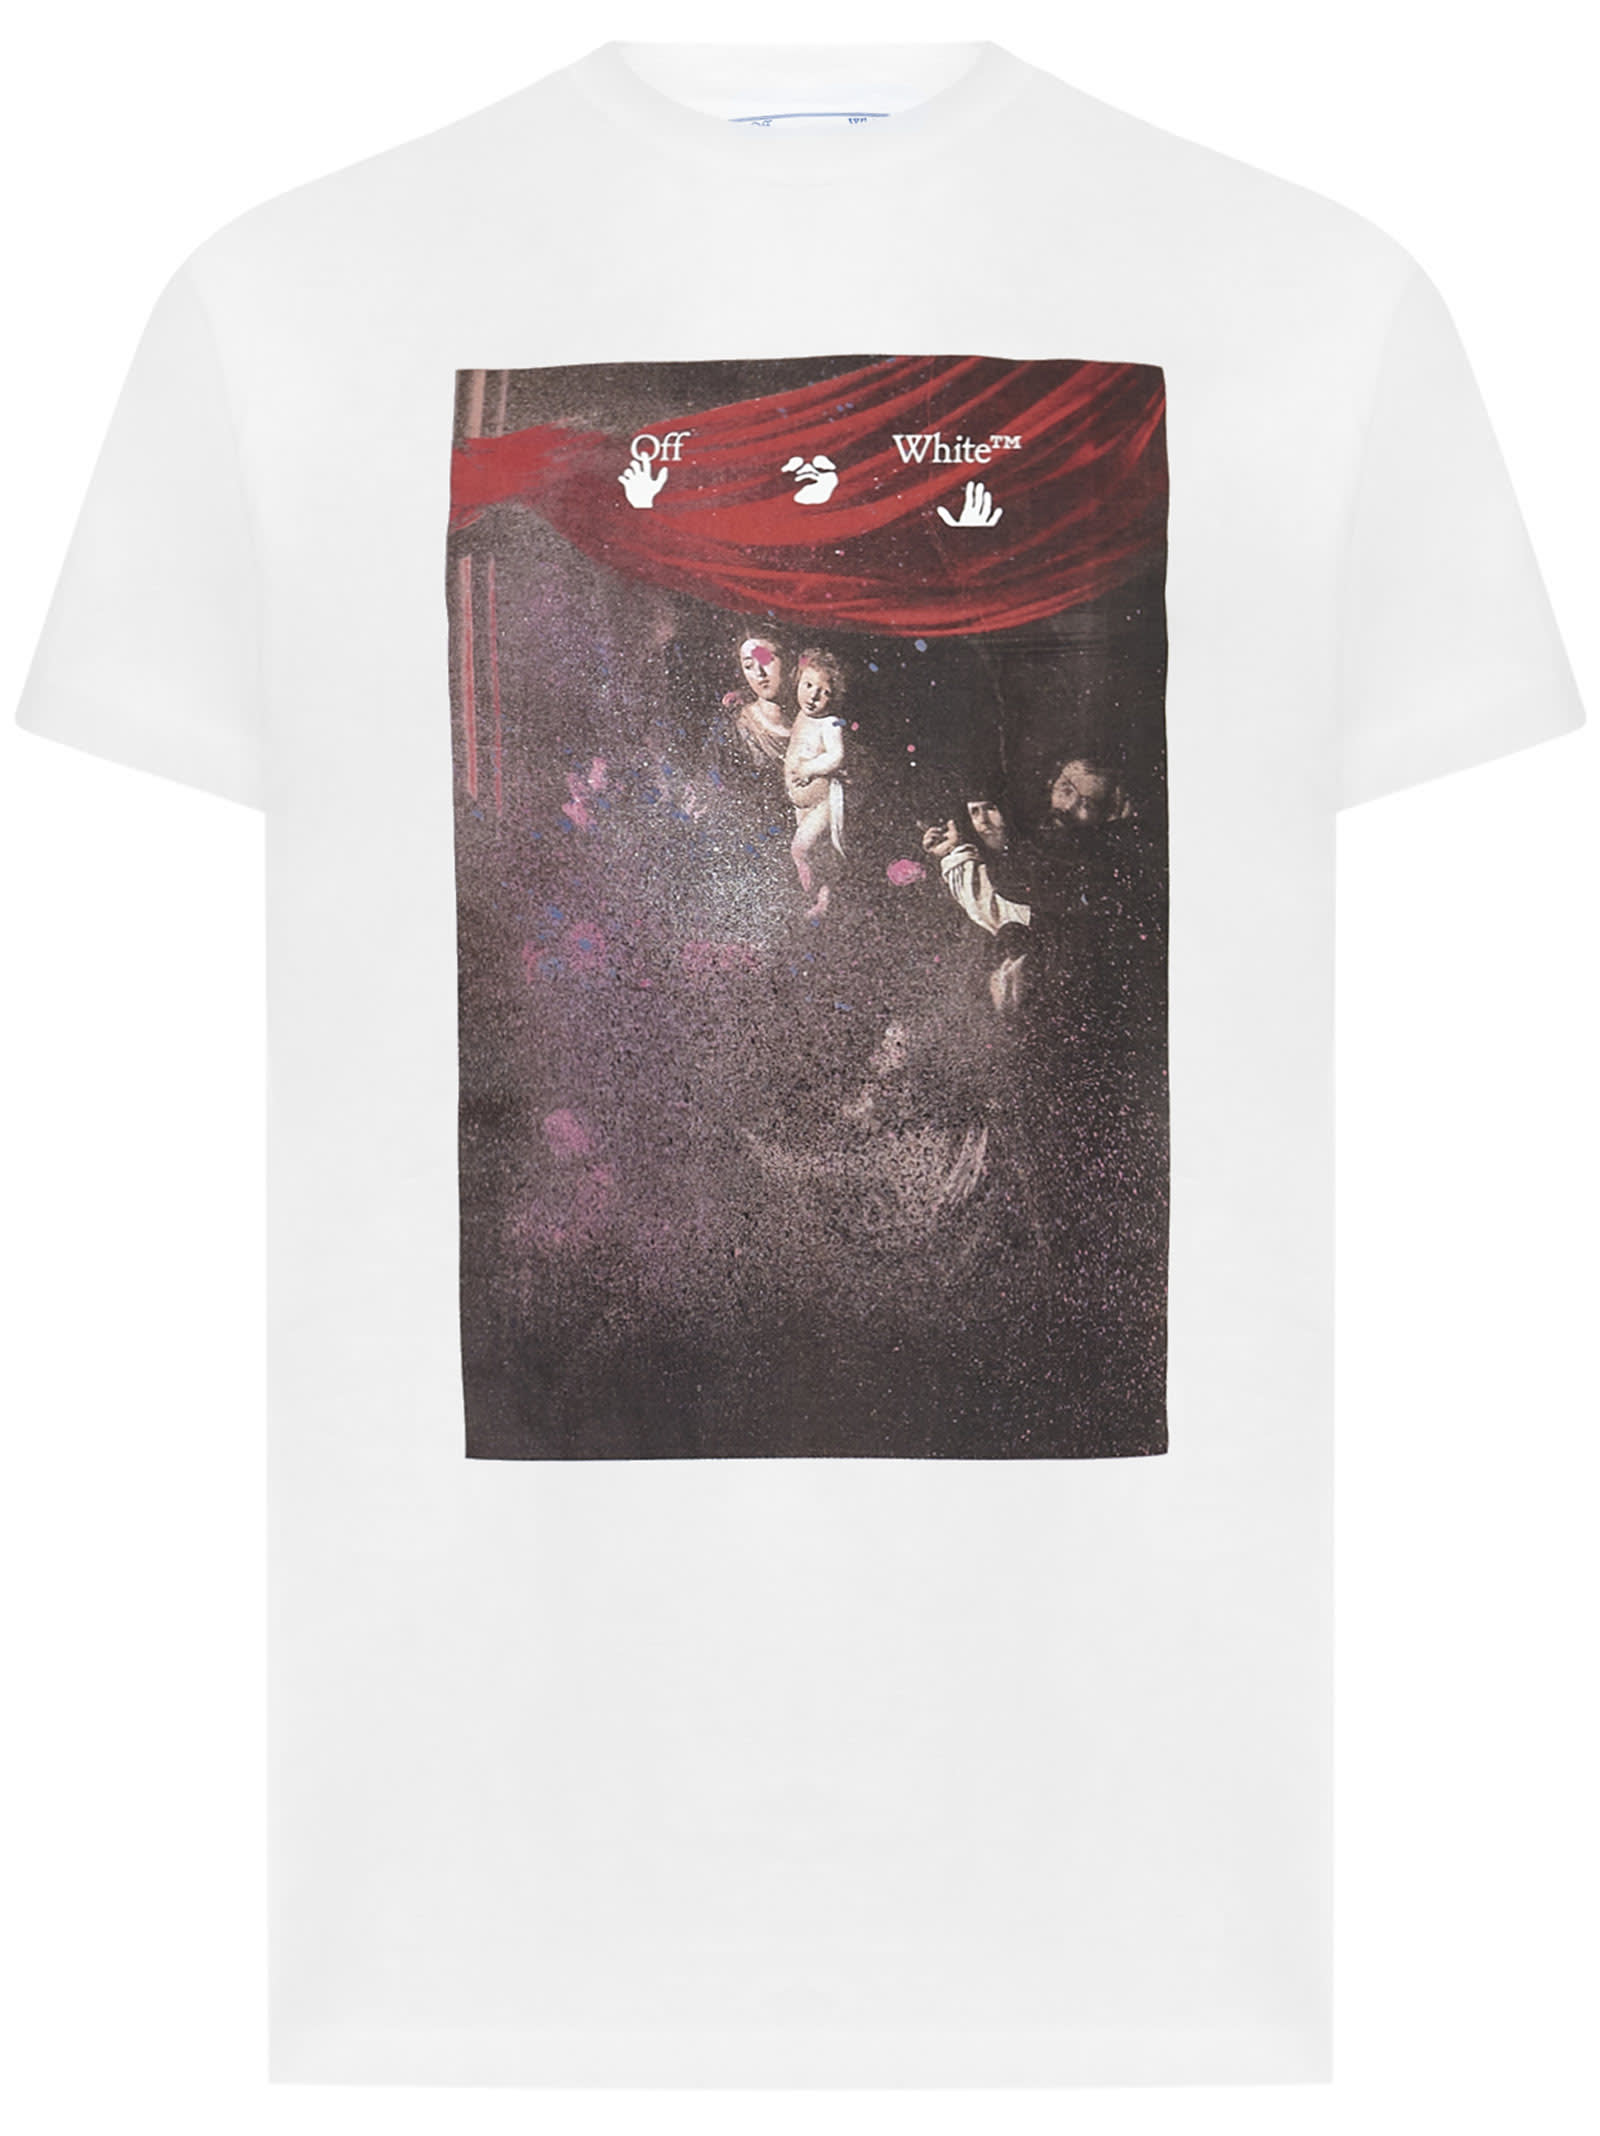 OFF-WHITE OFF-WHITE SPRAYED CARAVAGGIO T-SHIRT,OMAA027S21JER010 0101